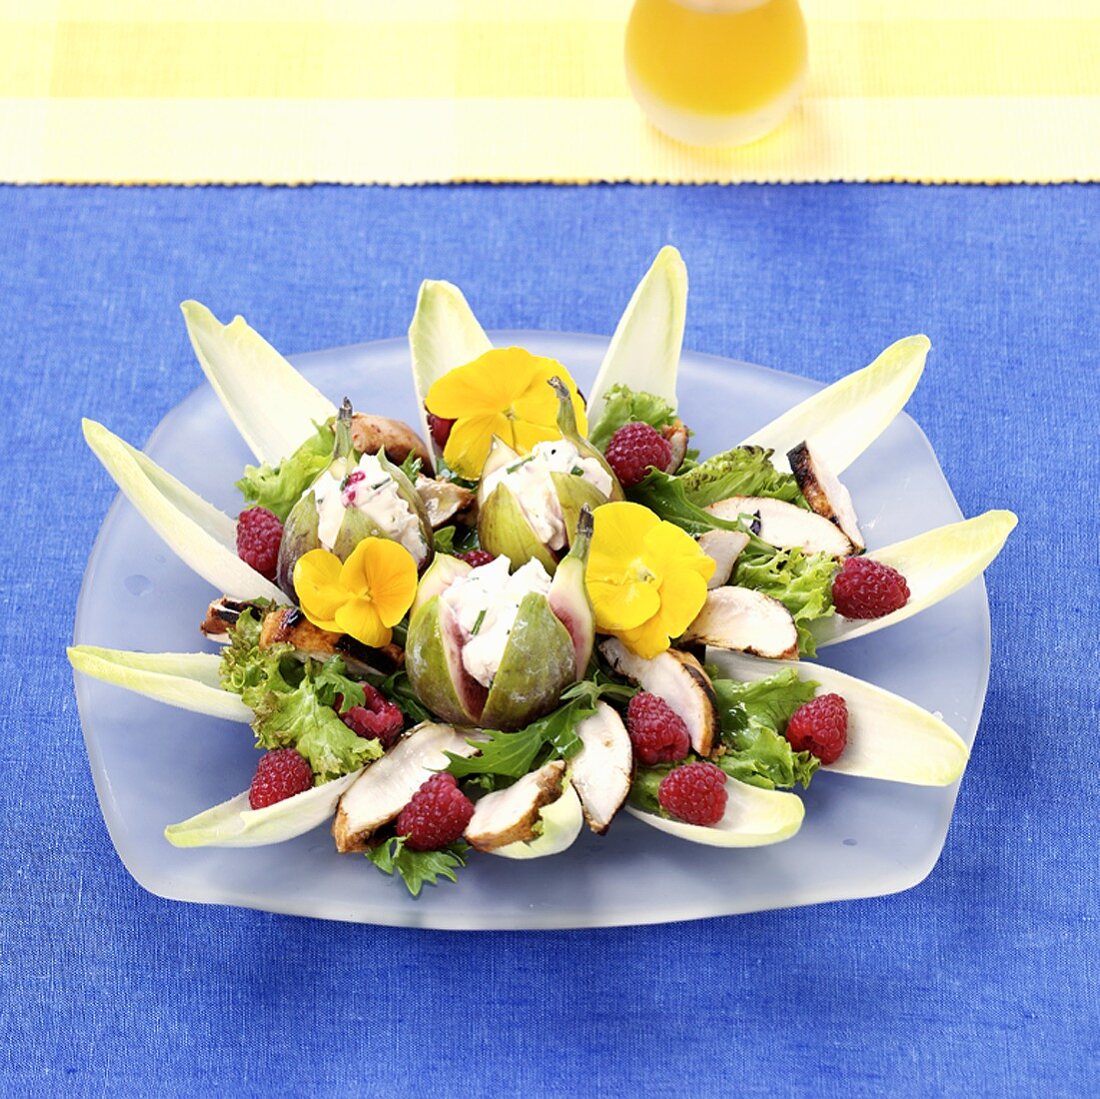 Chicory salad with figs, raspberries and chicken breast